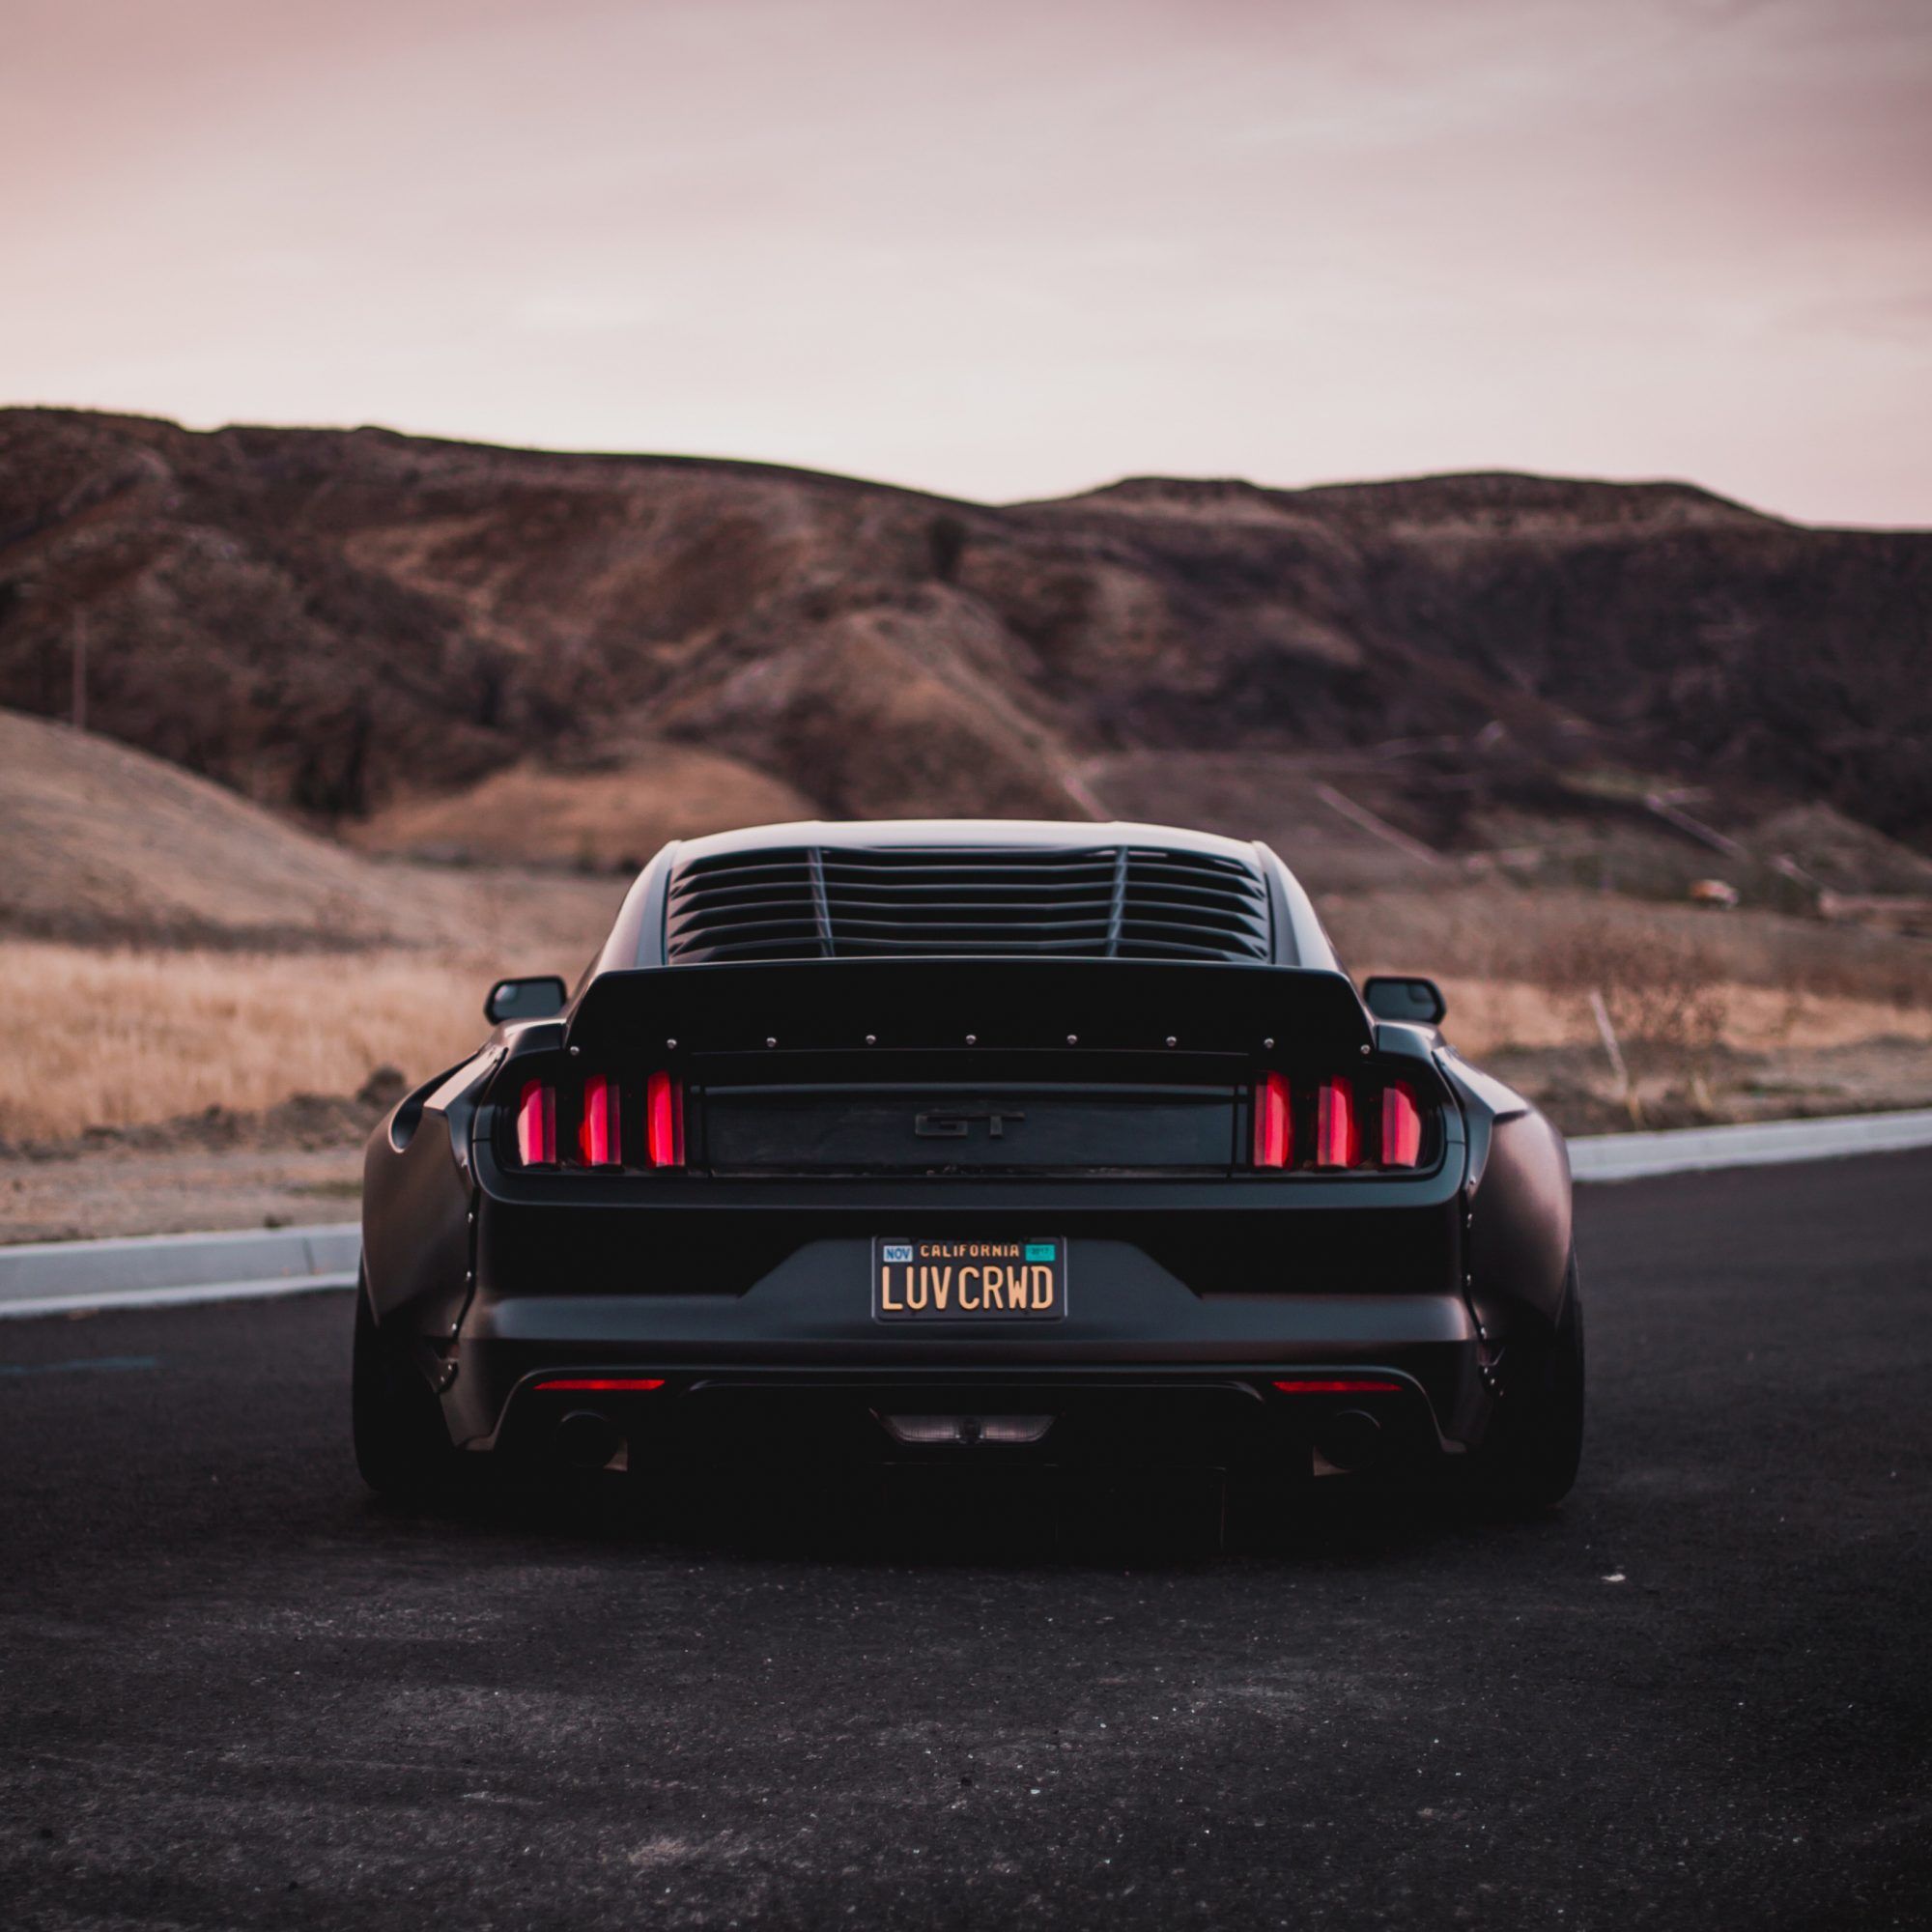 Ford Mustang widebody kit S550 wide body kit